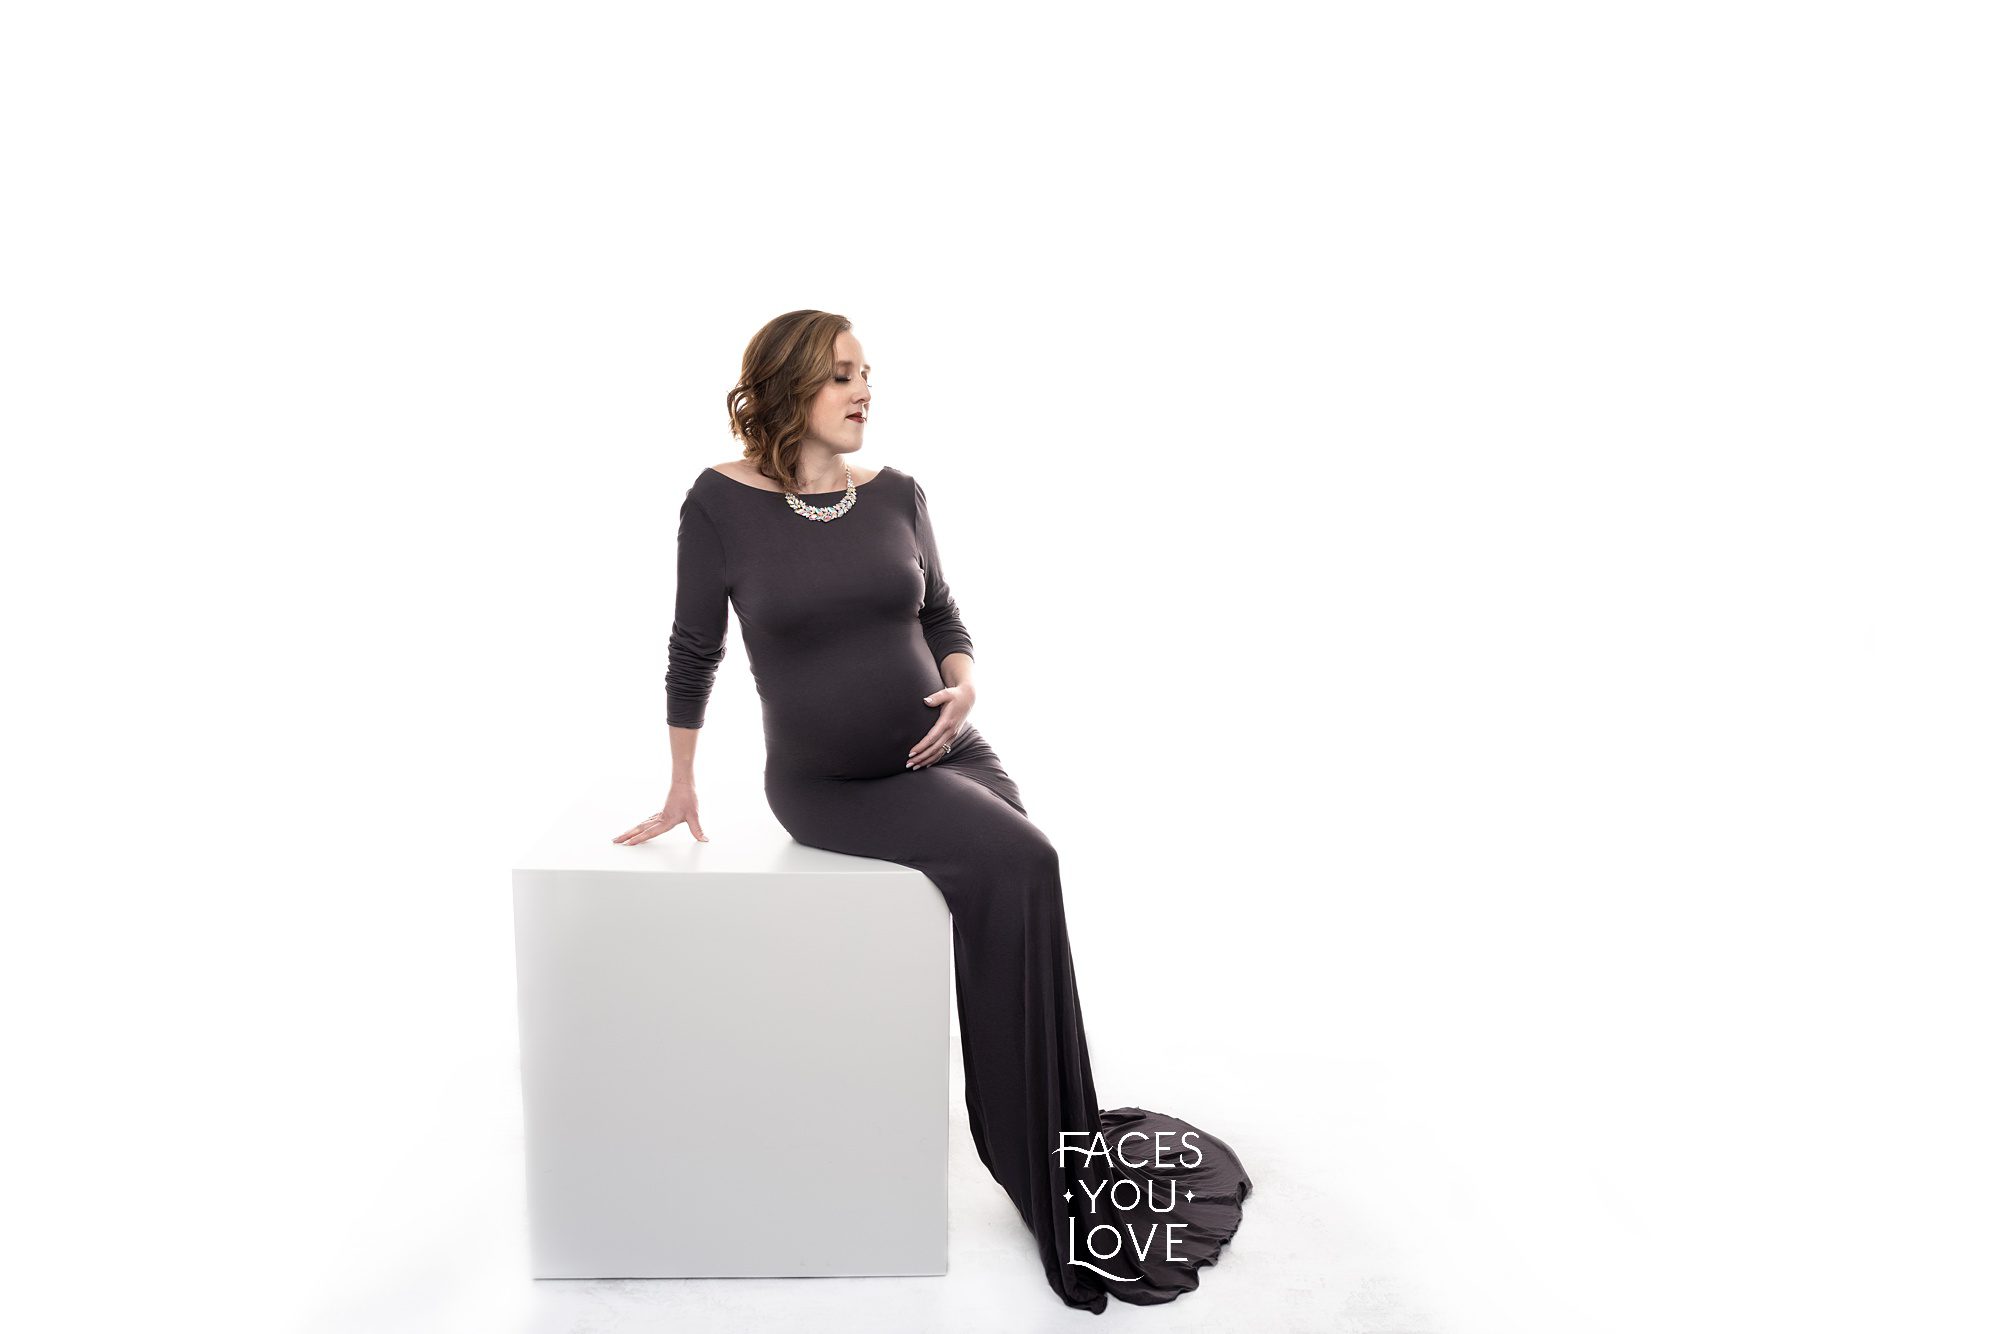 Glam maternity session photographed by Helen Ransom of Faces You Love Photography. Mom is in an elegant, long dark gray dress and wearing a statement necklace. She's on a white posing box, against a high-key white background.